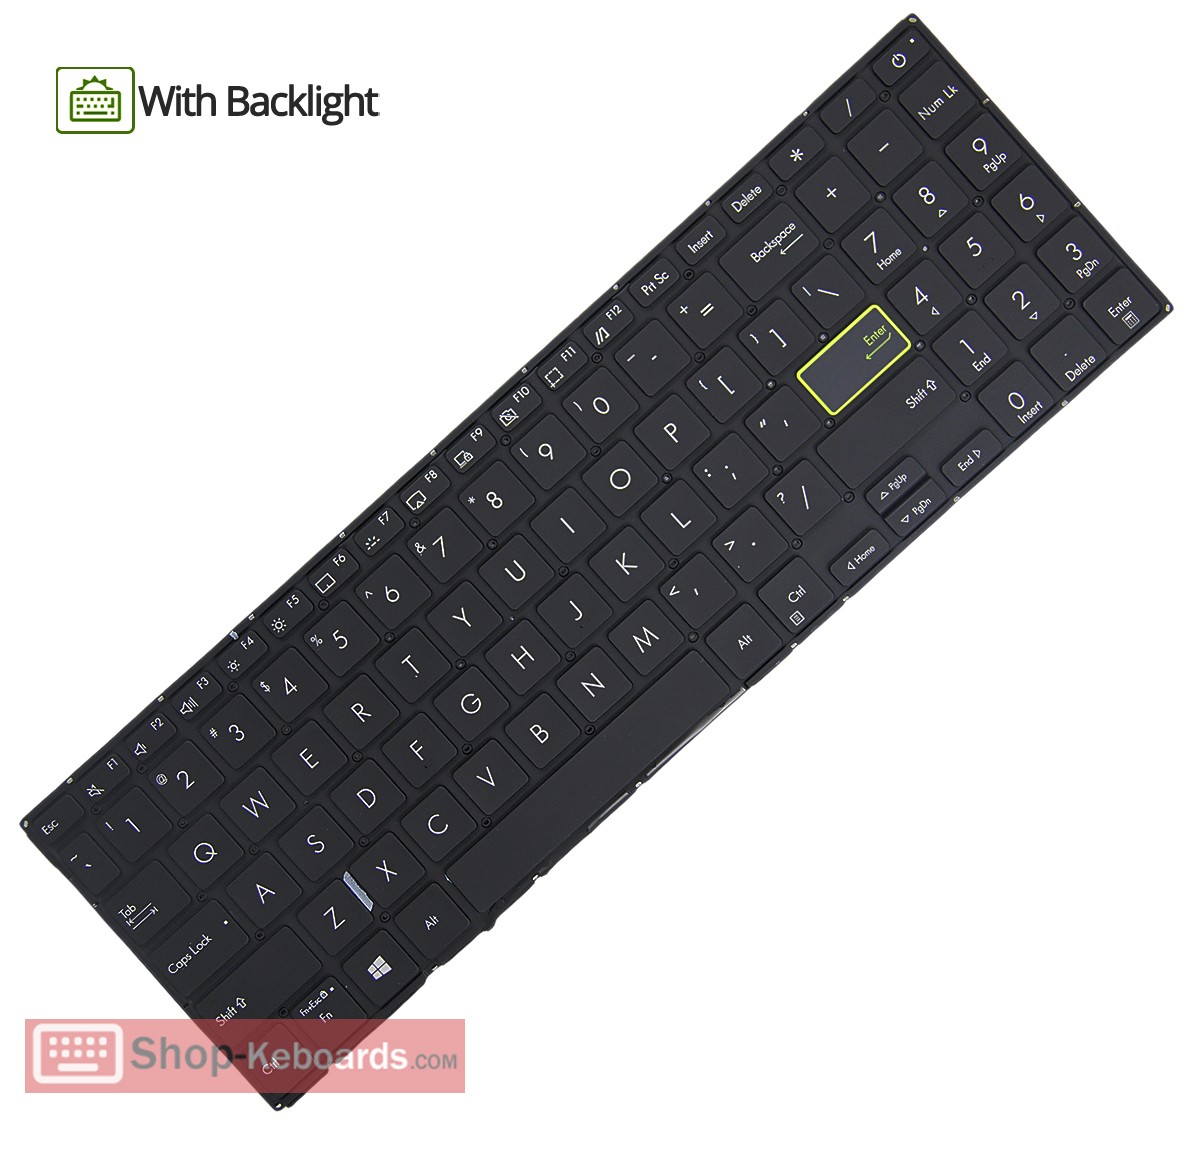 Asus 0KNB0-510EUK00 Keyboard replacement